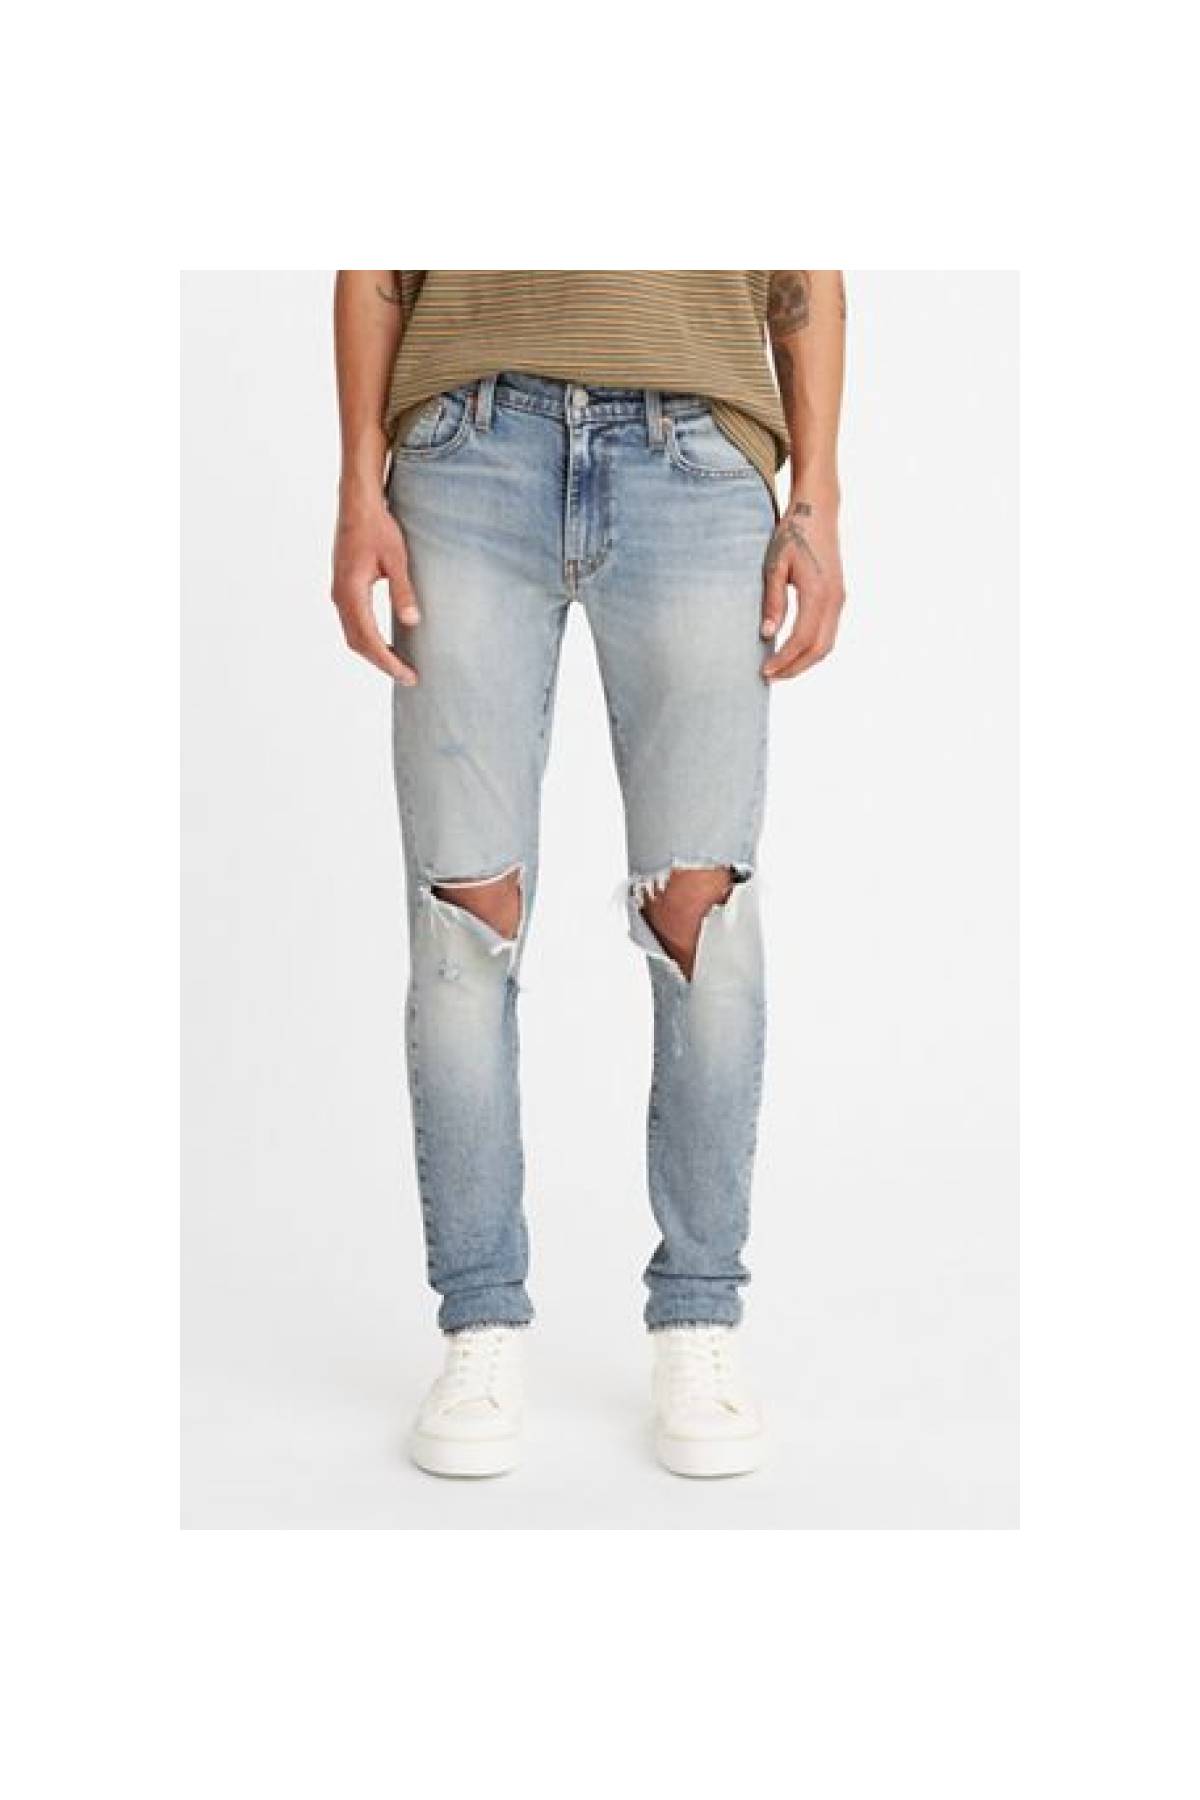 Men's Levi's Jeans, Ultimate Buying Guide